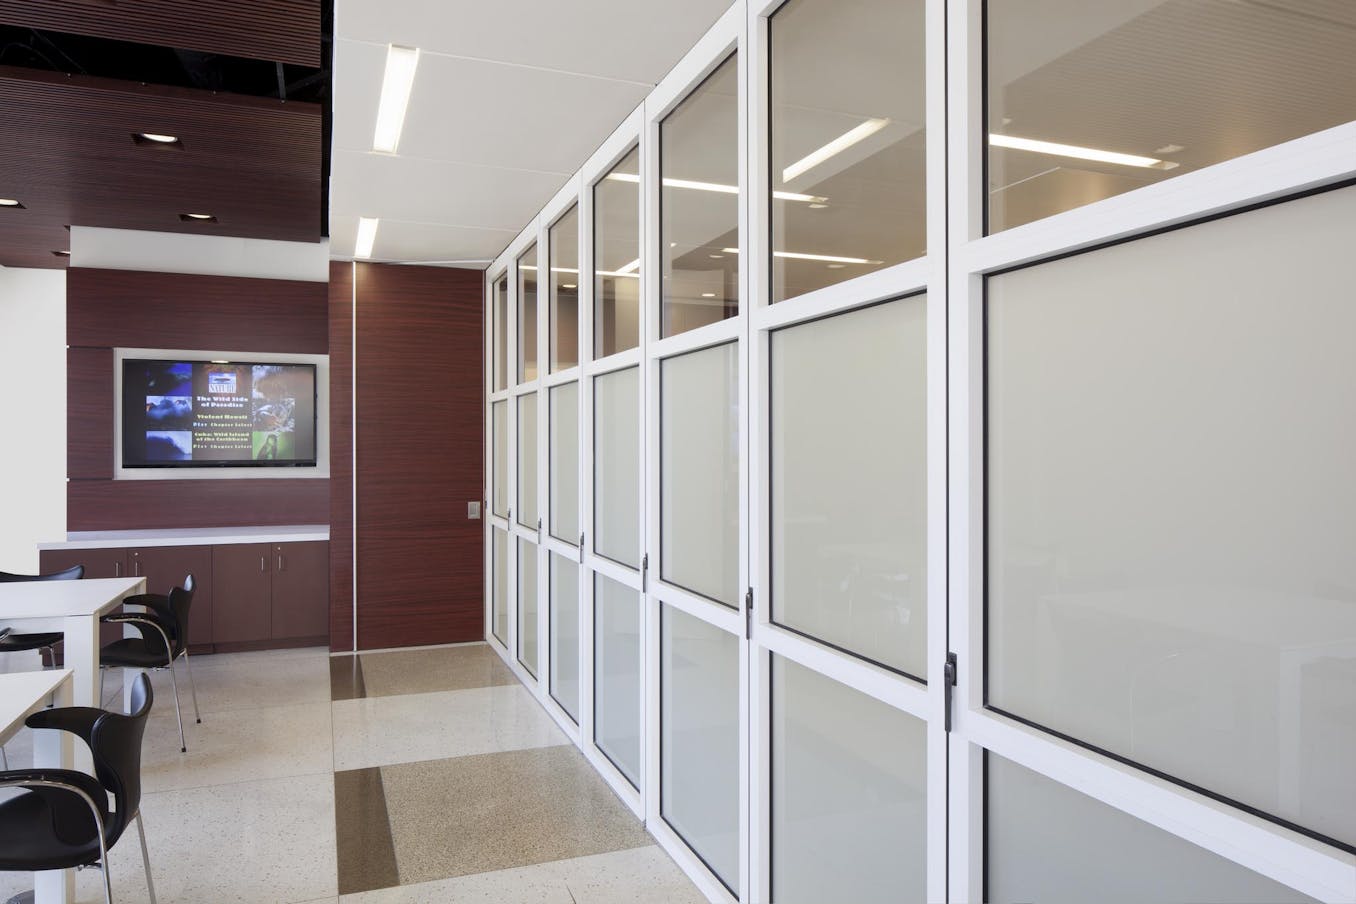 A conference room with white glass walls and a waiting room